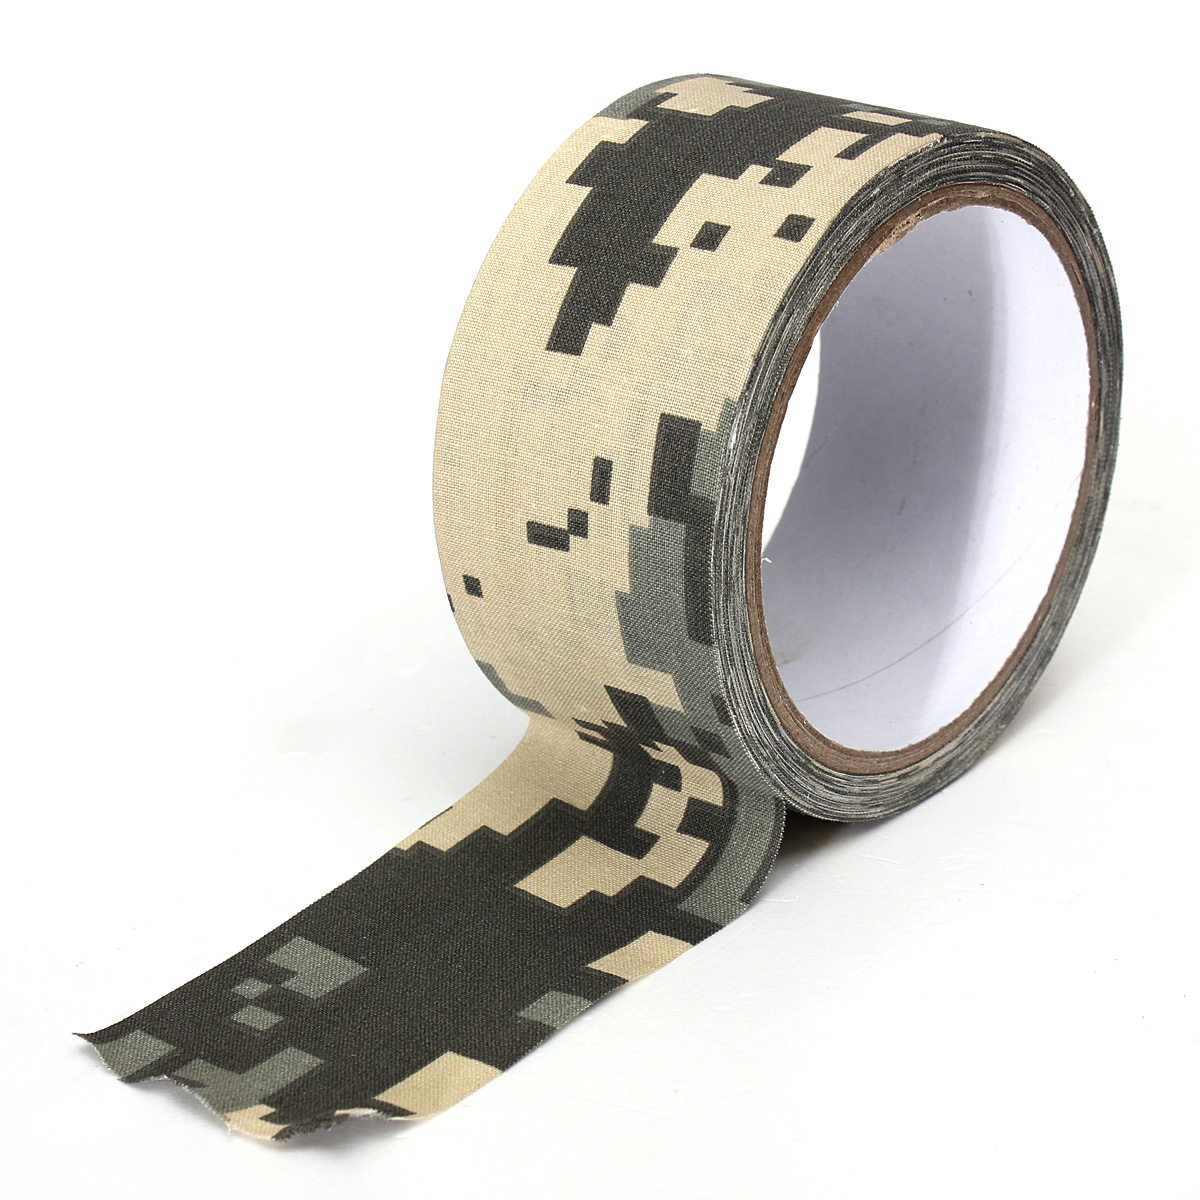 10M-Camouflage-Wrap-Tape-Camo-Tape-Duct-Waterproof-Mutifunctional-Fabric-Camping-Stealth-Tape-1310100-3